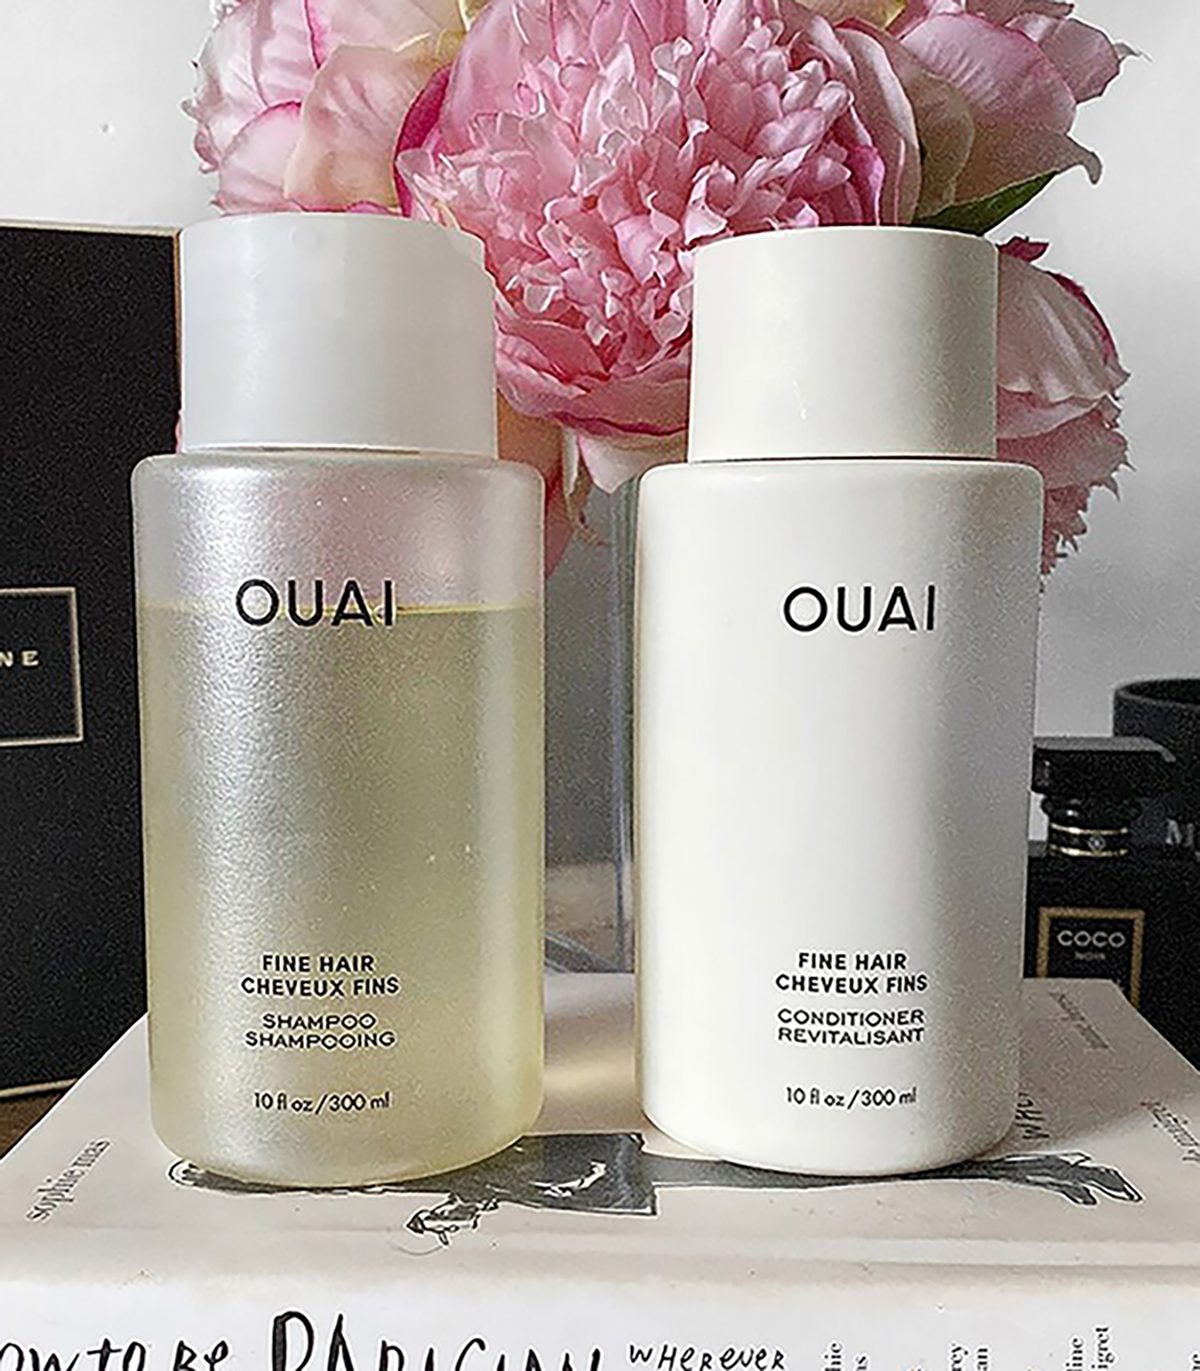 Ouai Shampoo and Conditioner Review - The Reluctant Blogger